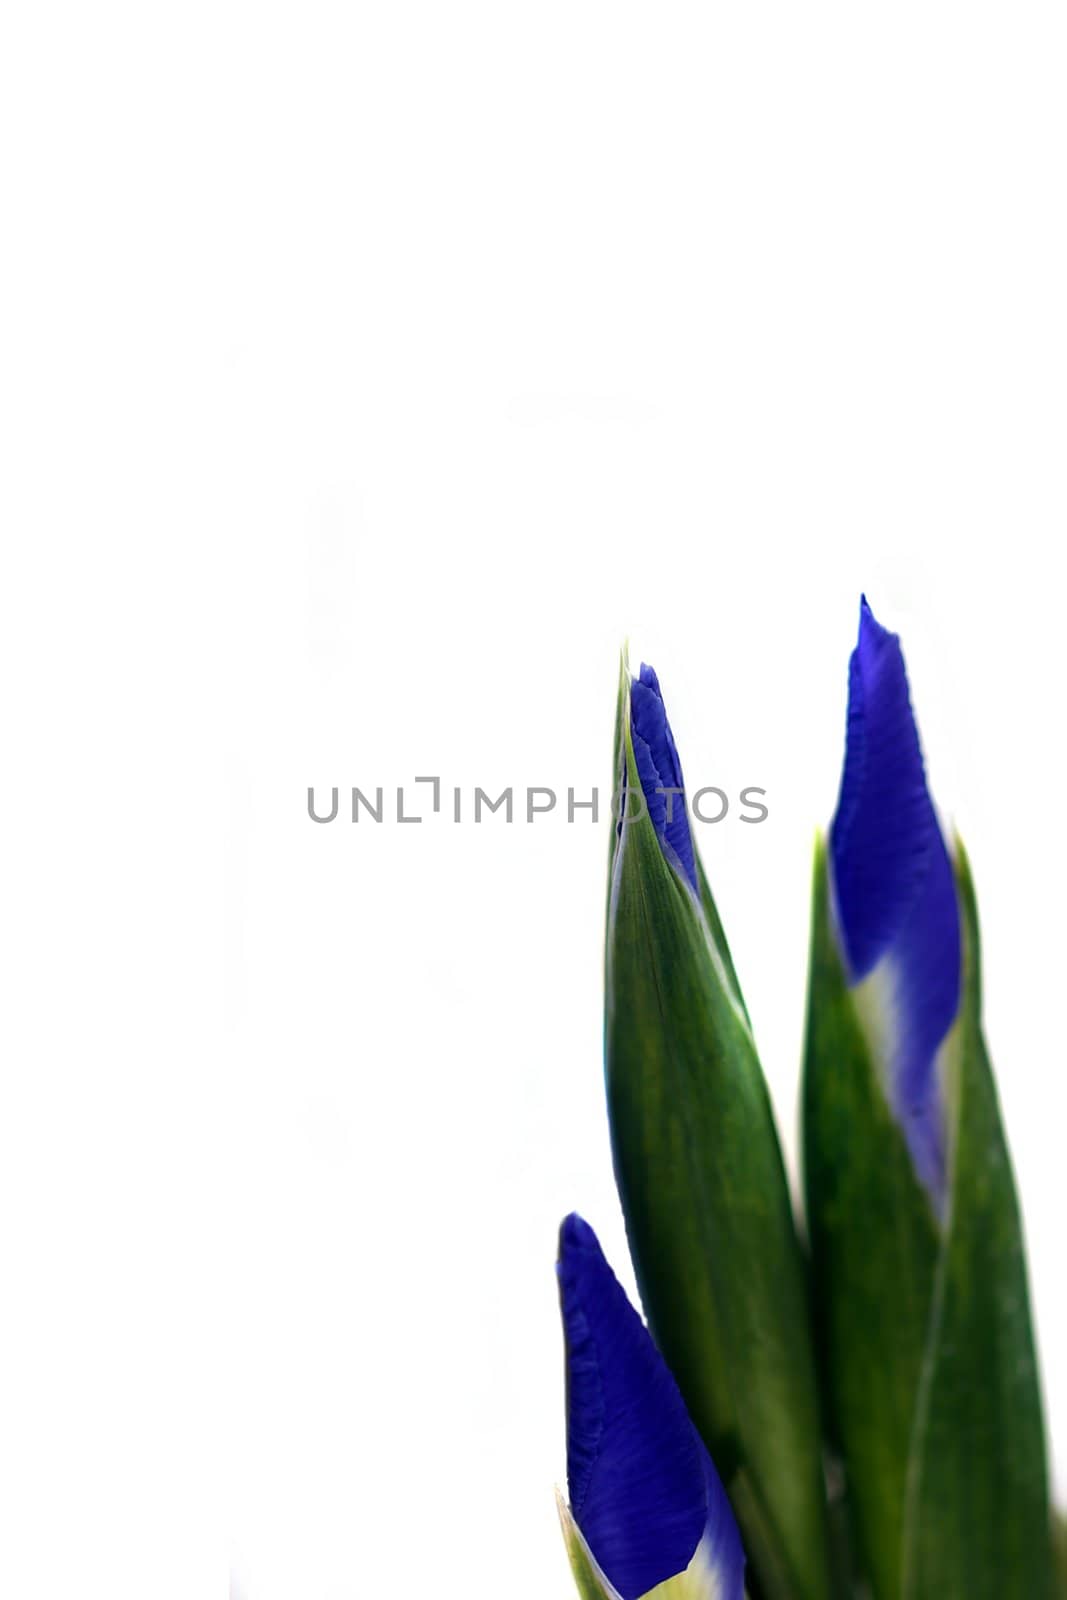 Blue and green Iris isolated on white background.